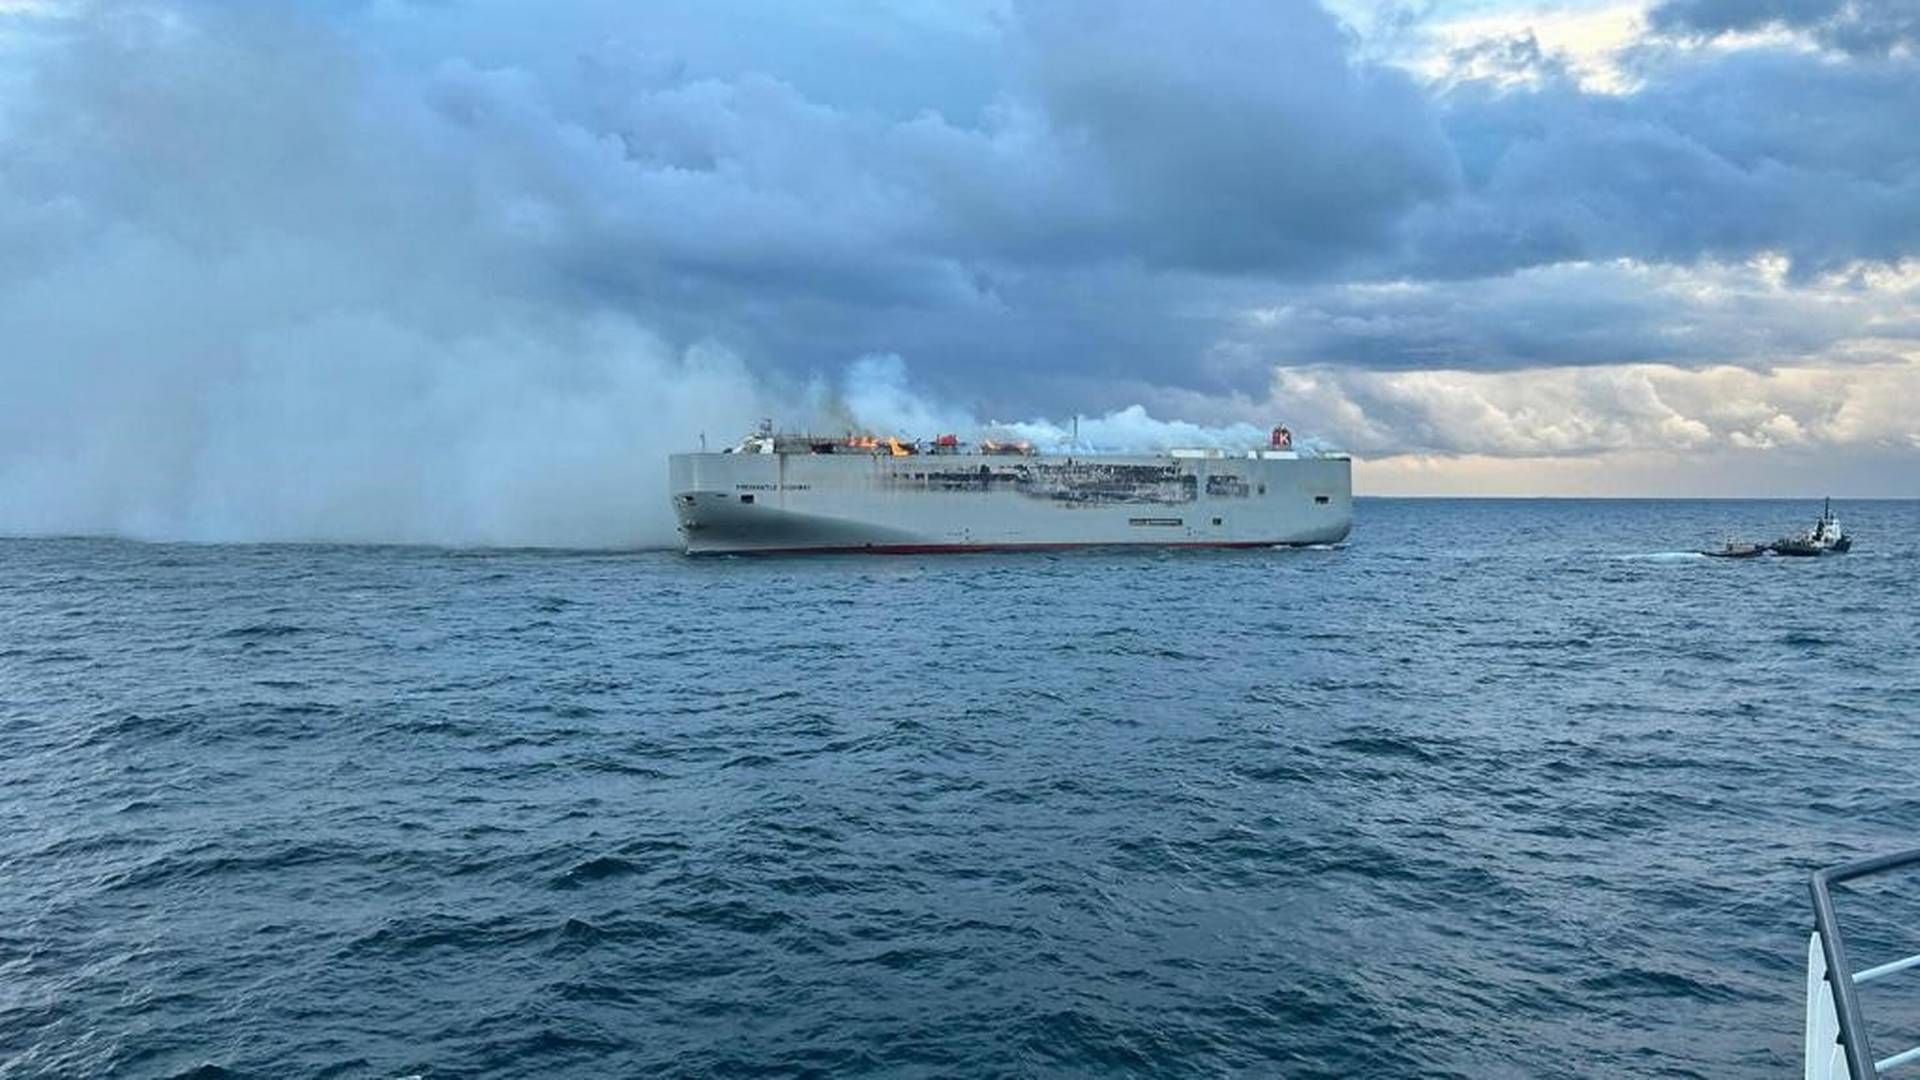 The Netherlands Coastguard has shared a picture of the burning ship on Twitter. | Photo: Kustwacht